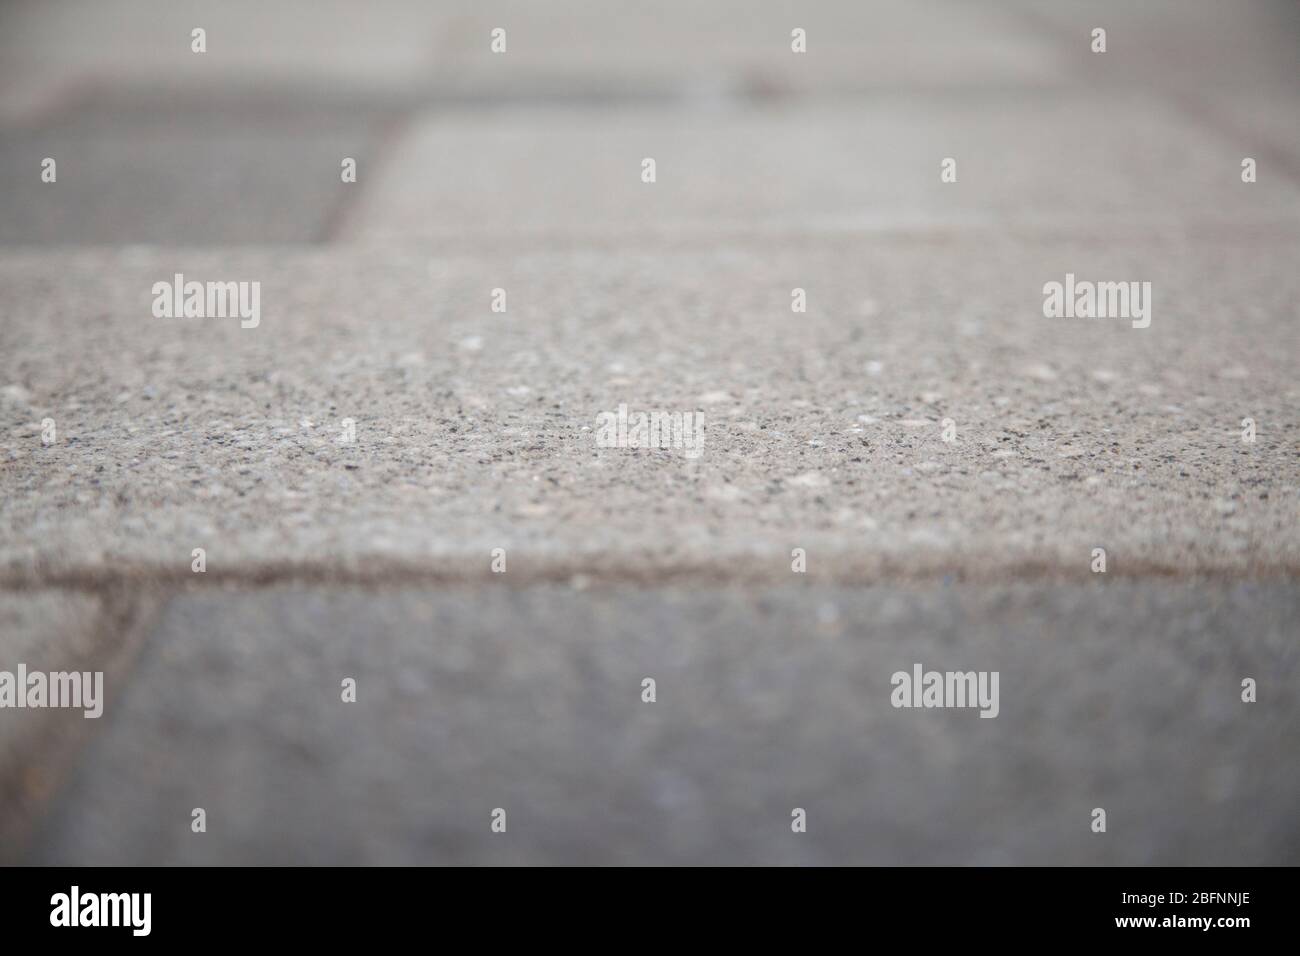 Narrow view of a concrete tile in the blurred sidewalk. Cement block on a pedestrian crossing. Textured abstract background bokeh. Stock Photo